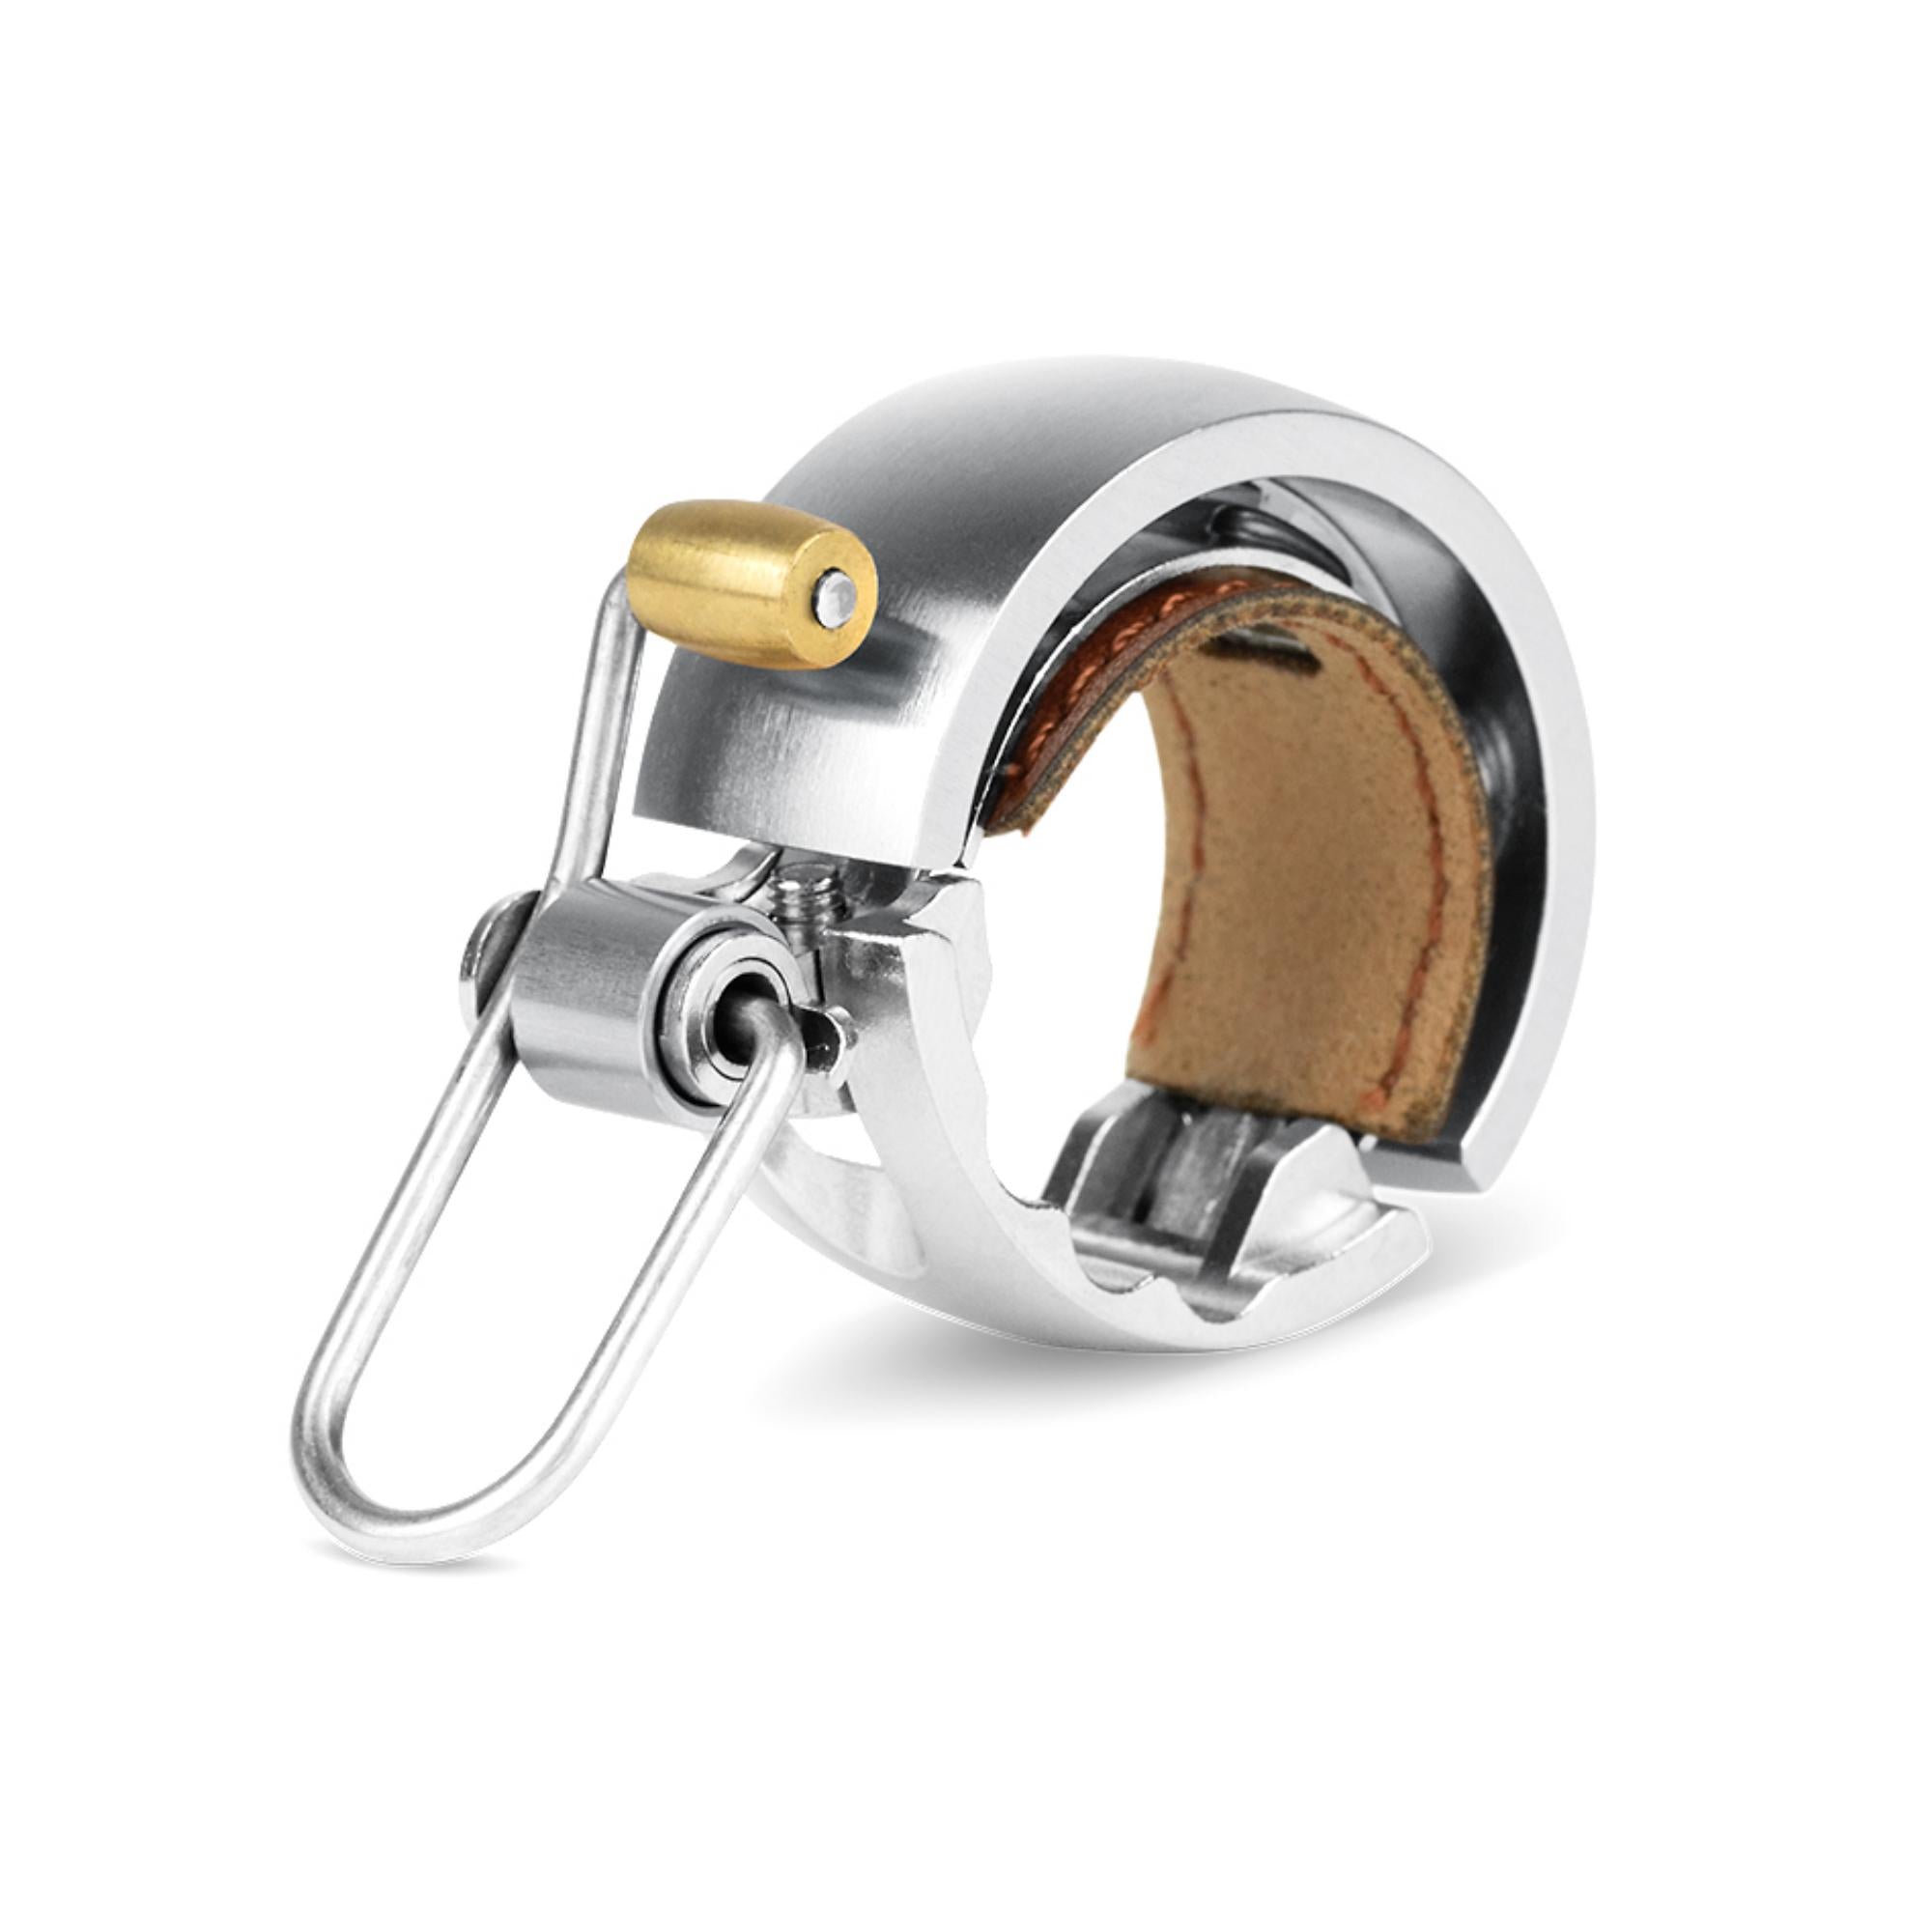 Knog Oi Luxe Bike Bell Silver Small